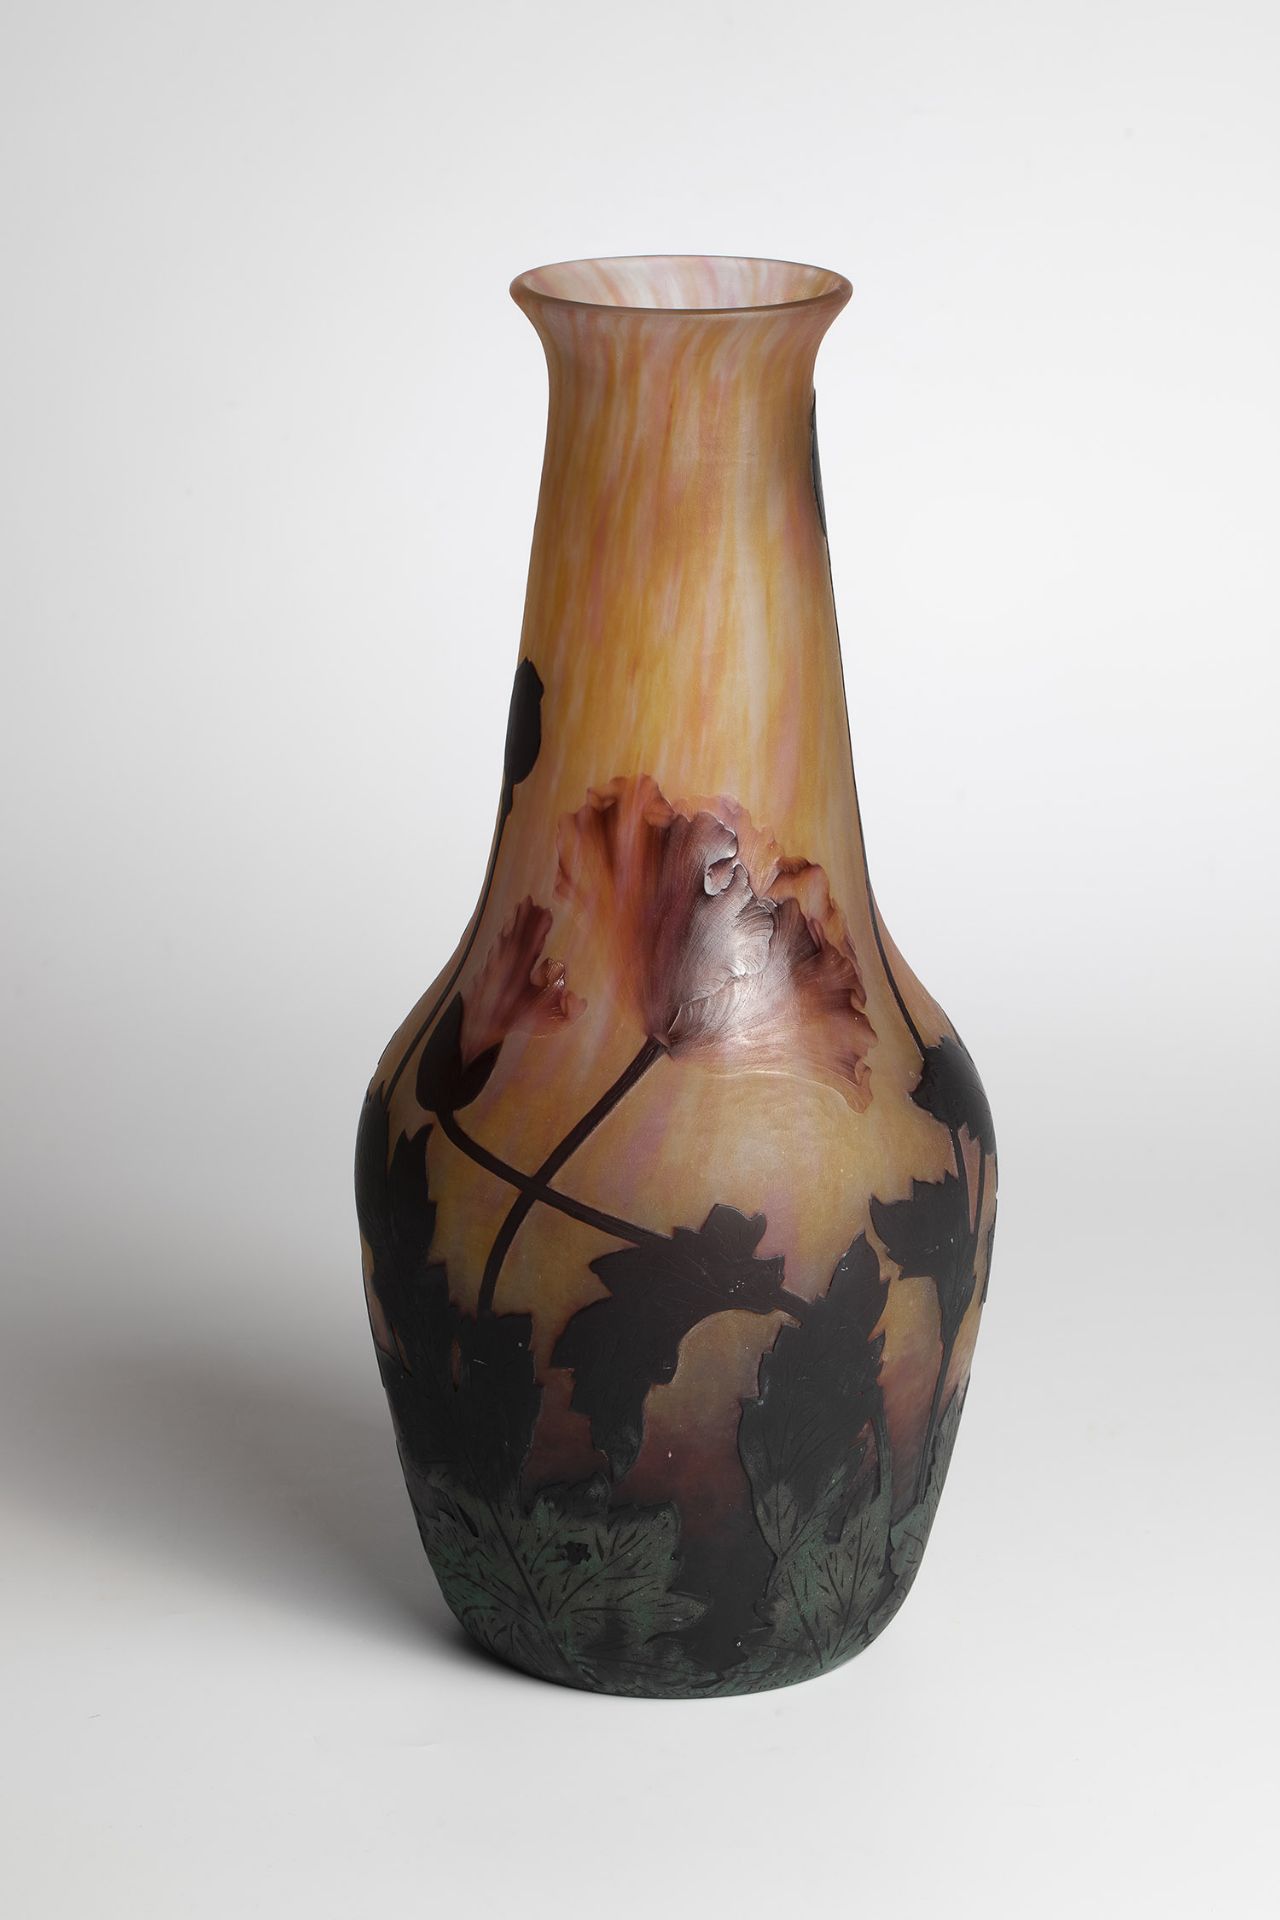 Large vase with poppies Daum FrÃ¨res, Nancy, circa 1906 Colourless glass with powder meltings in - Image 2 of 4